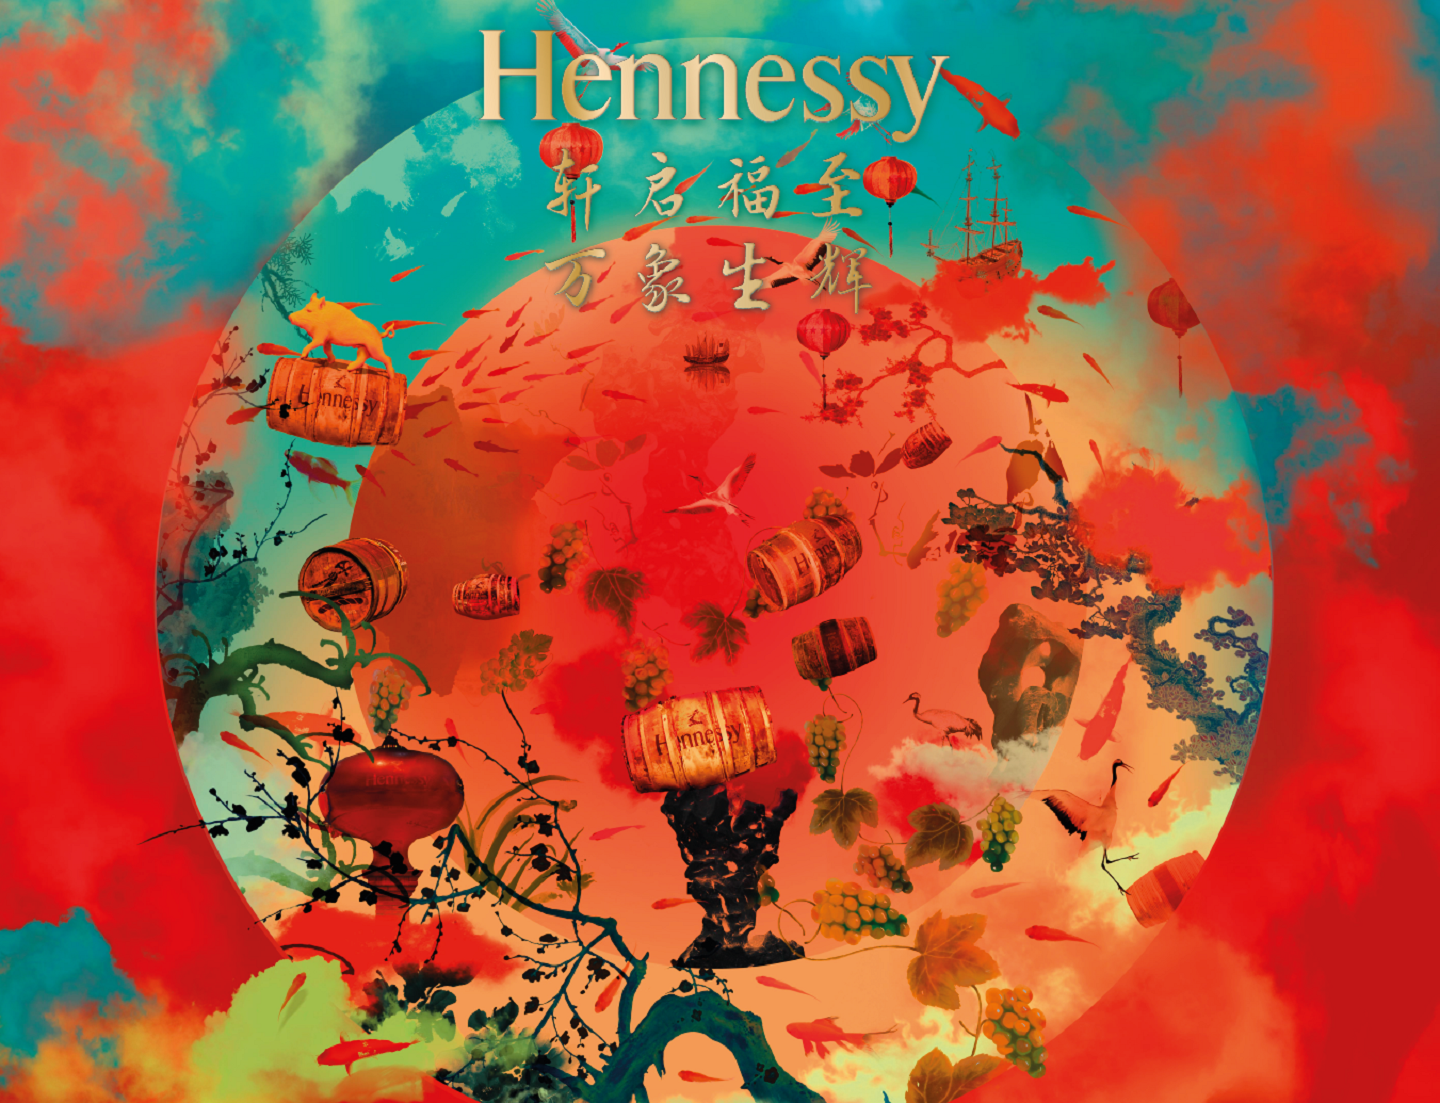 hennessy_cny19_croppings_1.2_0